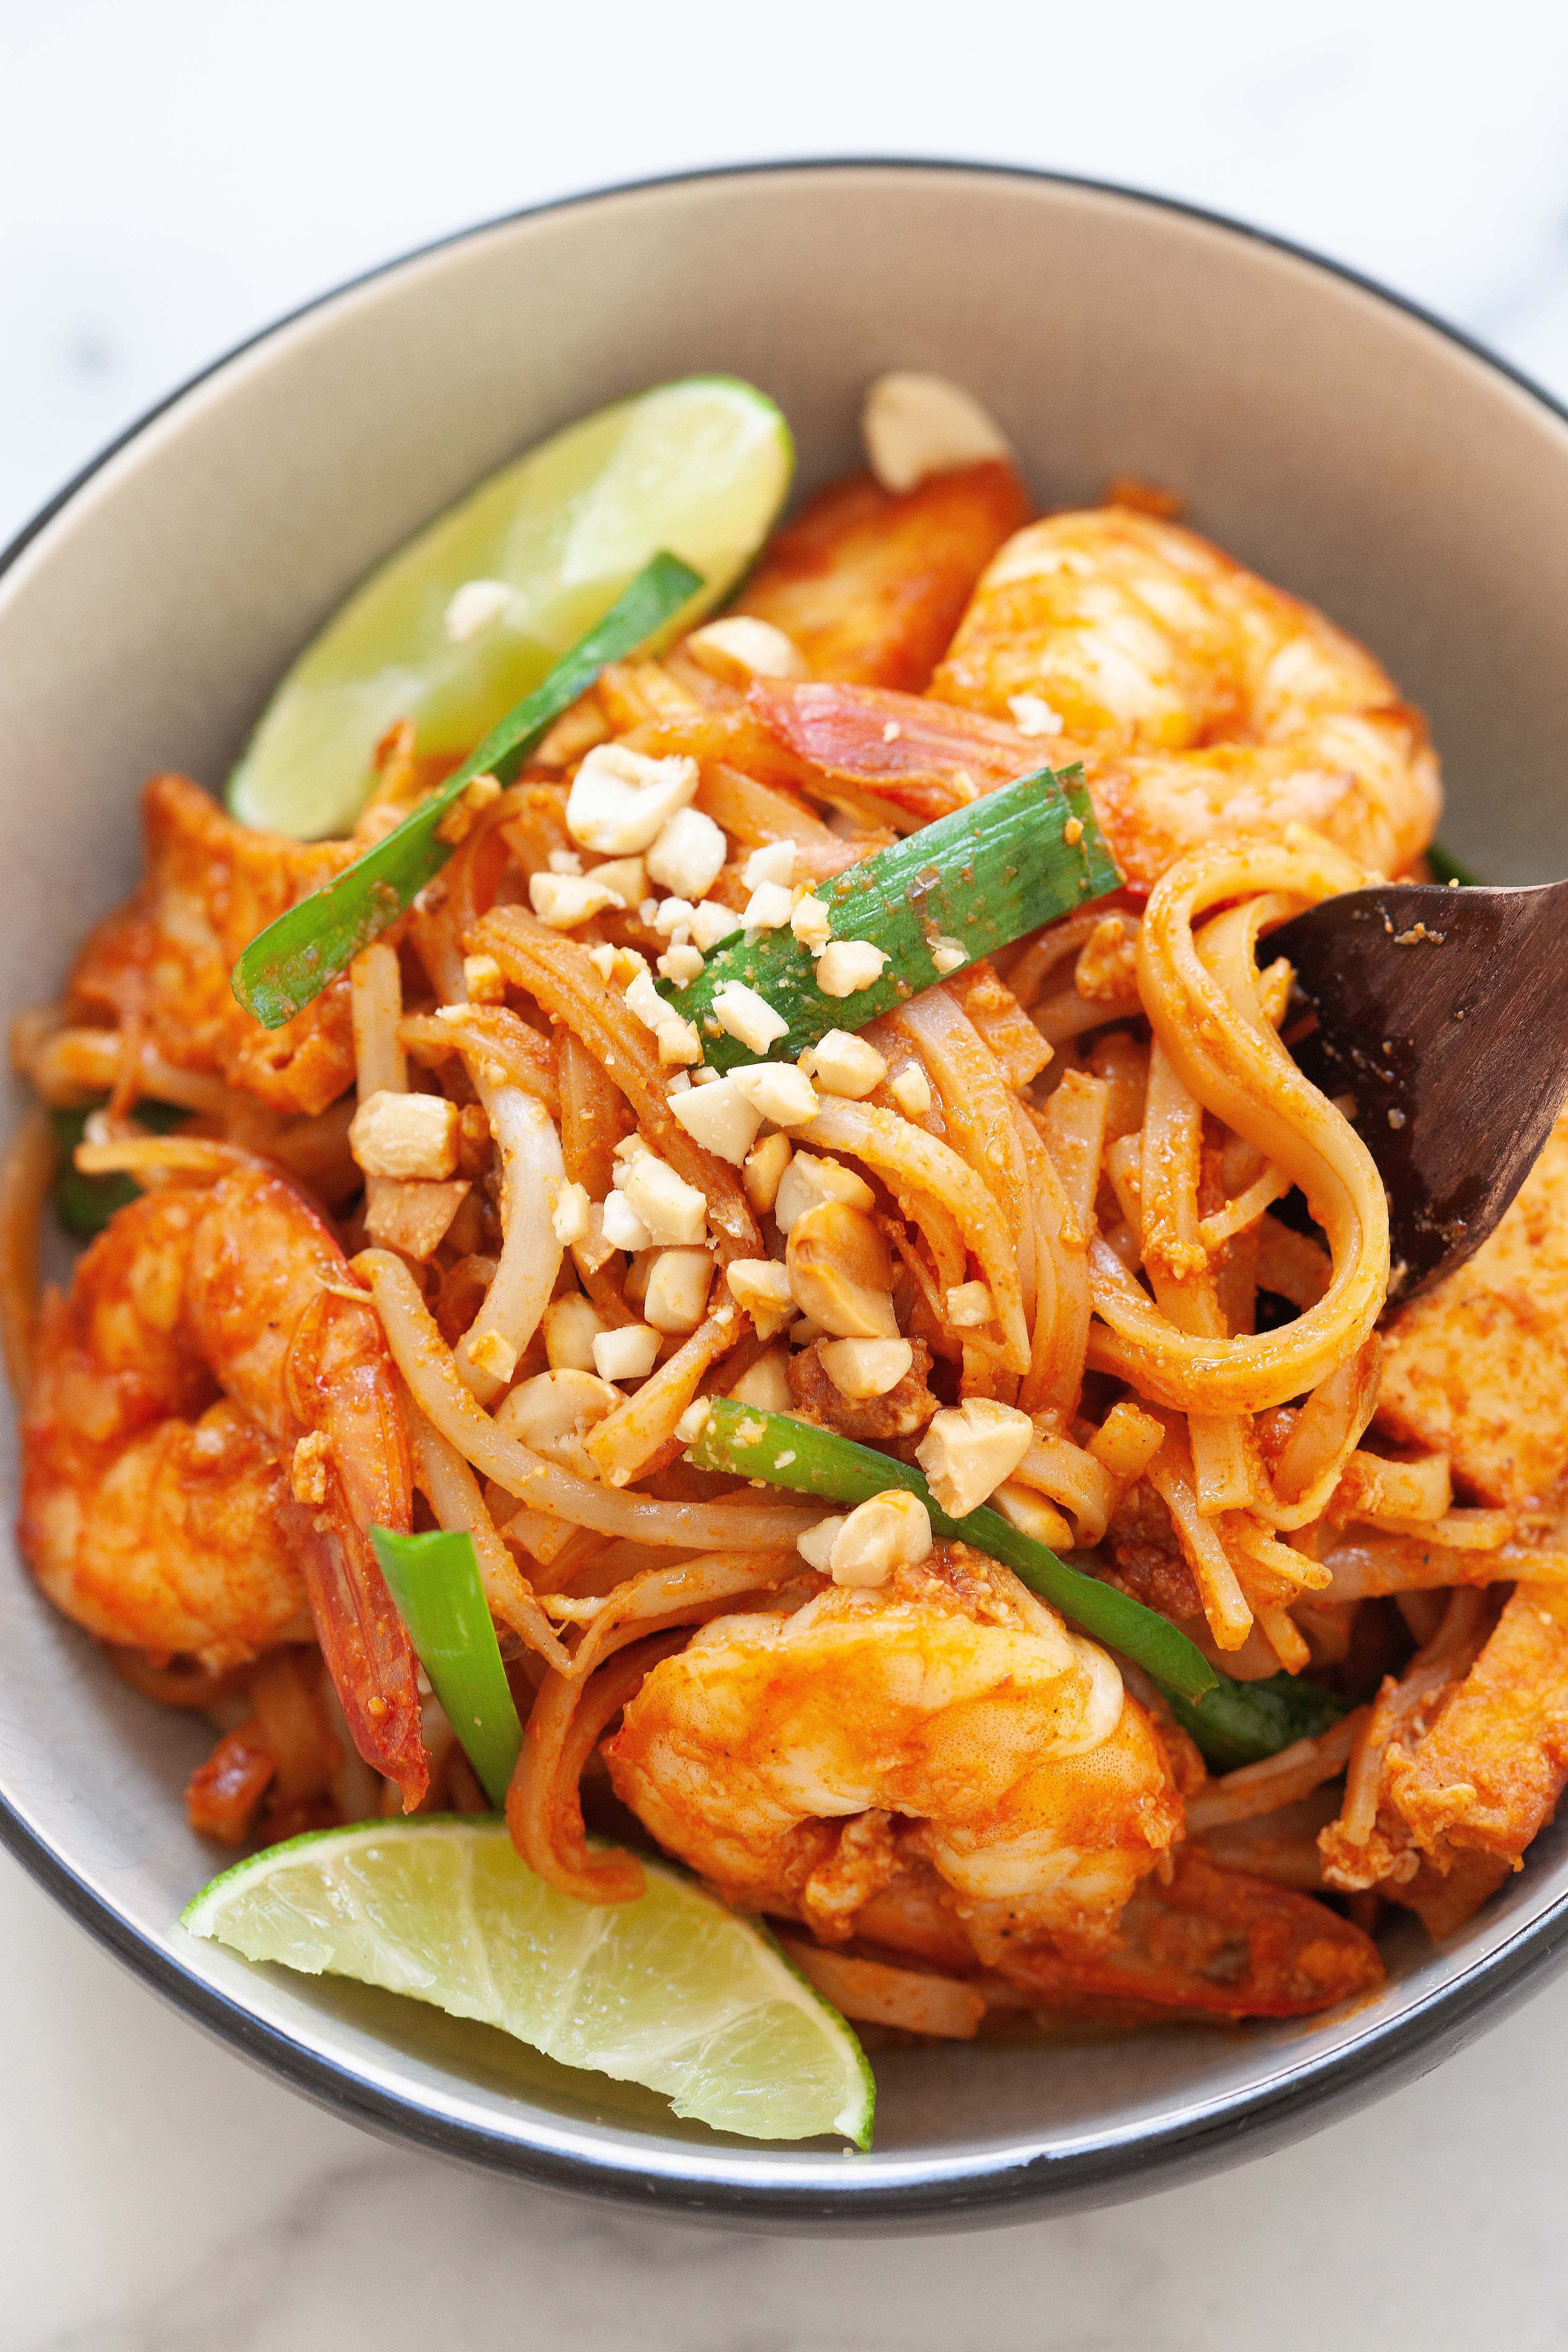 Pad Thai noodles with rice noodles, Pad Thai sauce, chicken, shrimp and tofu.